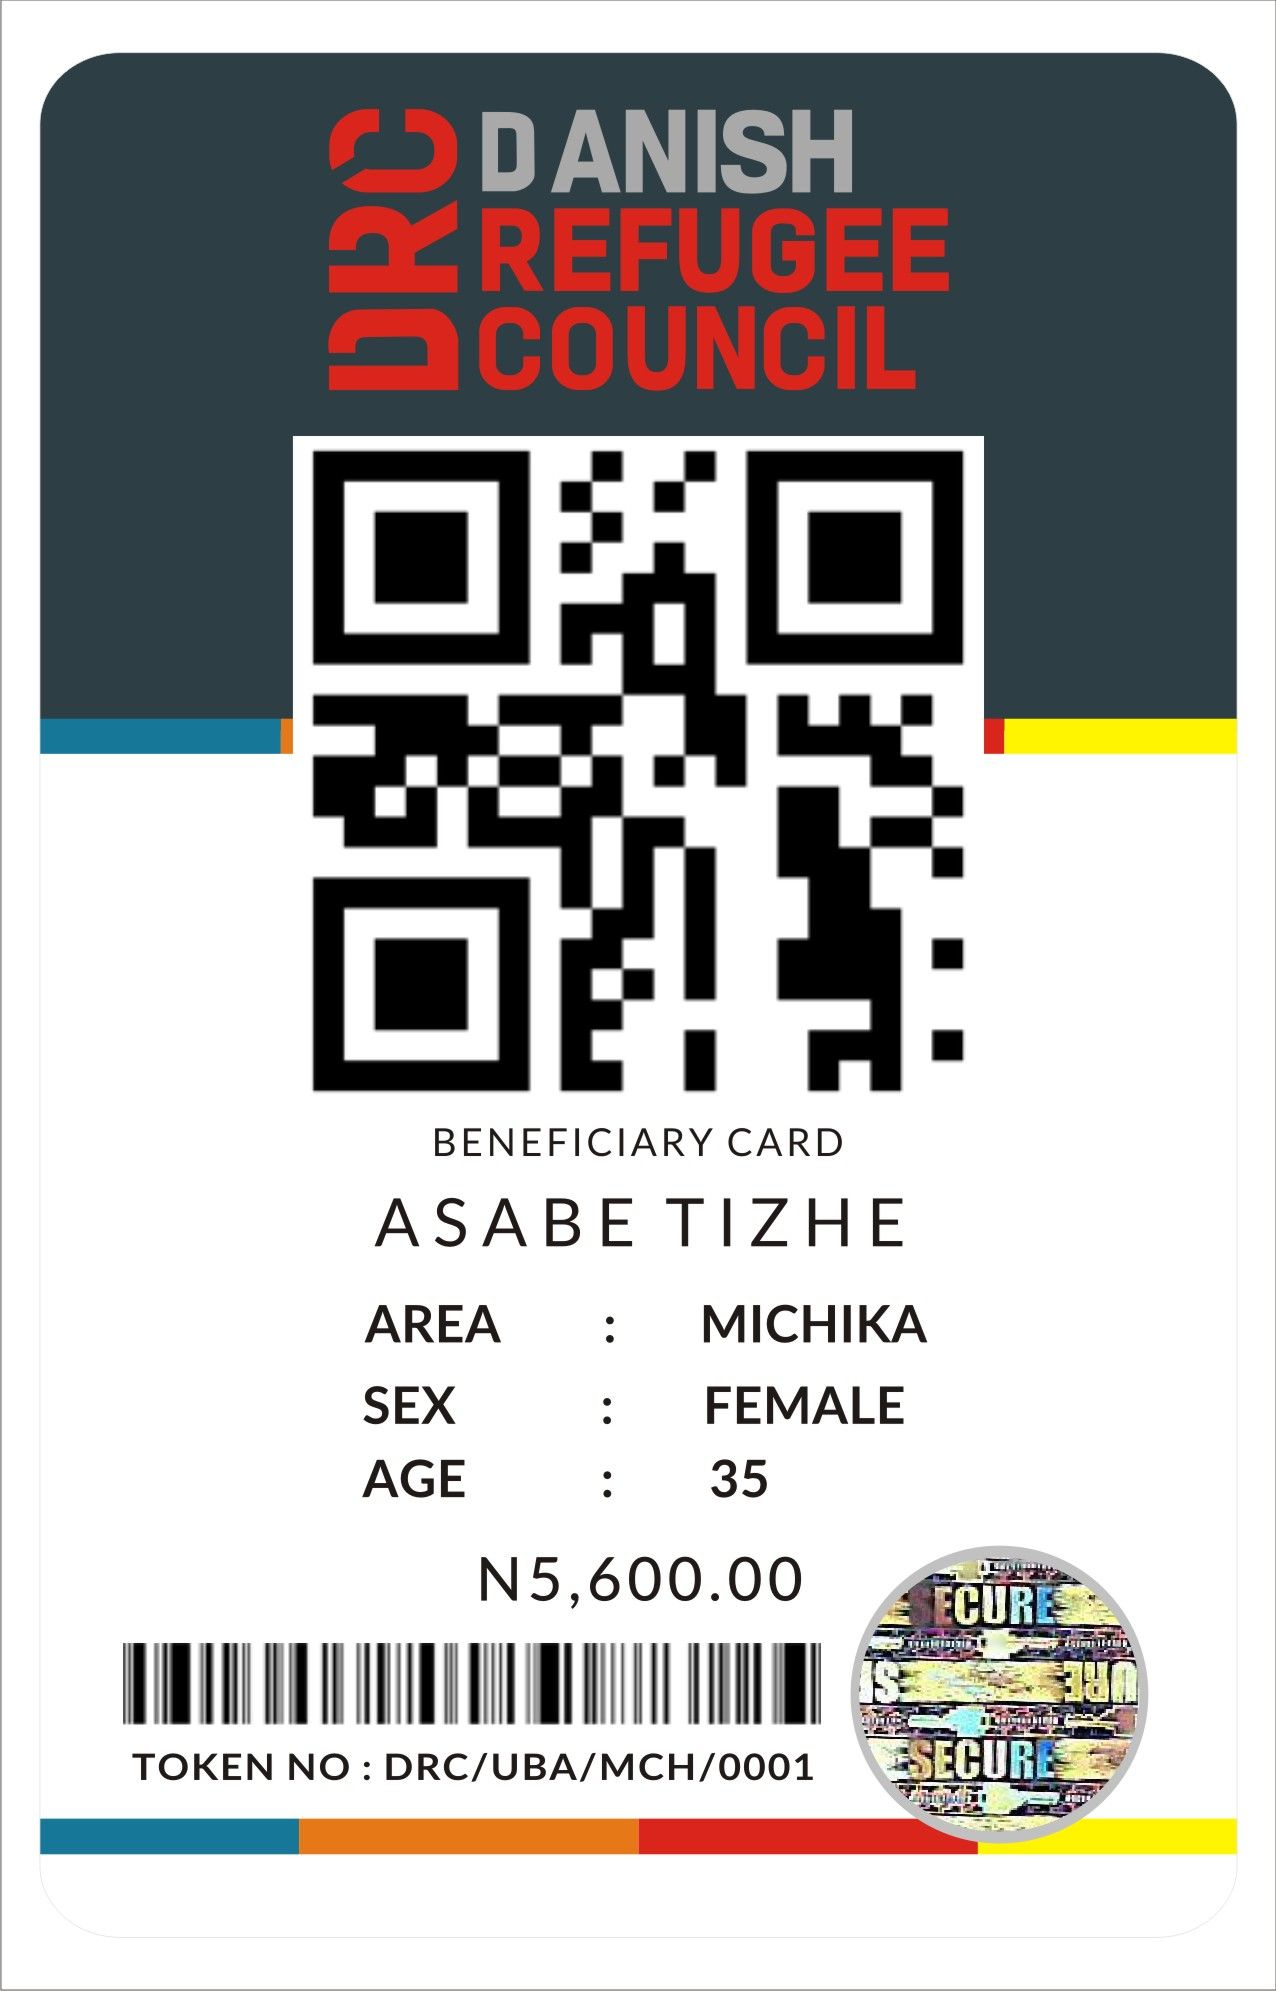 CALL EMMANUEL ON 08176499649 TO PRINT QR CODE LABELS, BARCODE, AUTHENTICATION LABELS ETC IN LAGOS NIGERIA